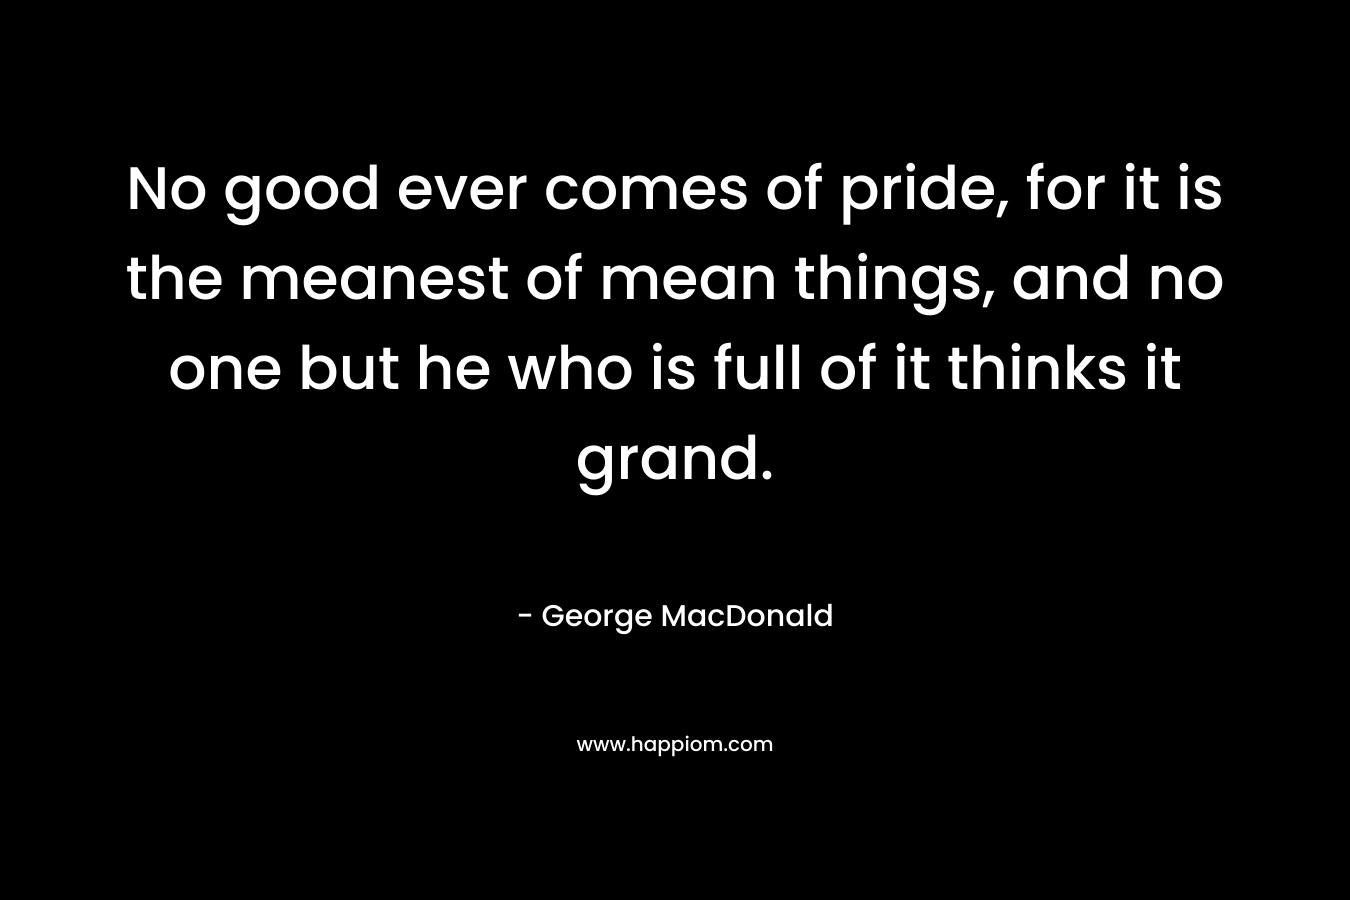 No good ever comes of pride, for it is the meanest of mean things, and no one but he who is full of it thinks it grand. – George MacDonald